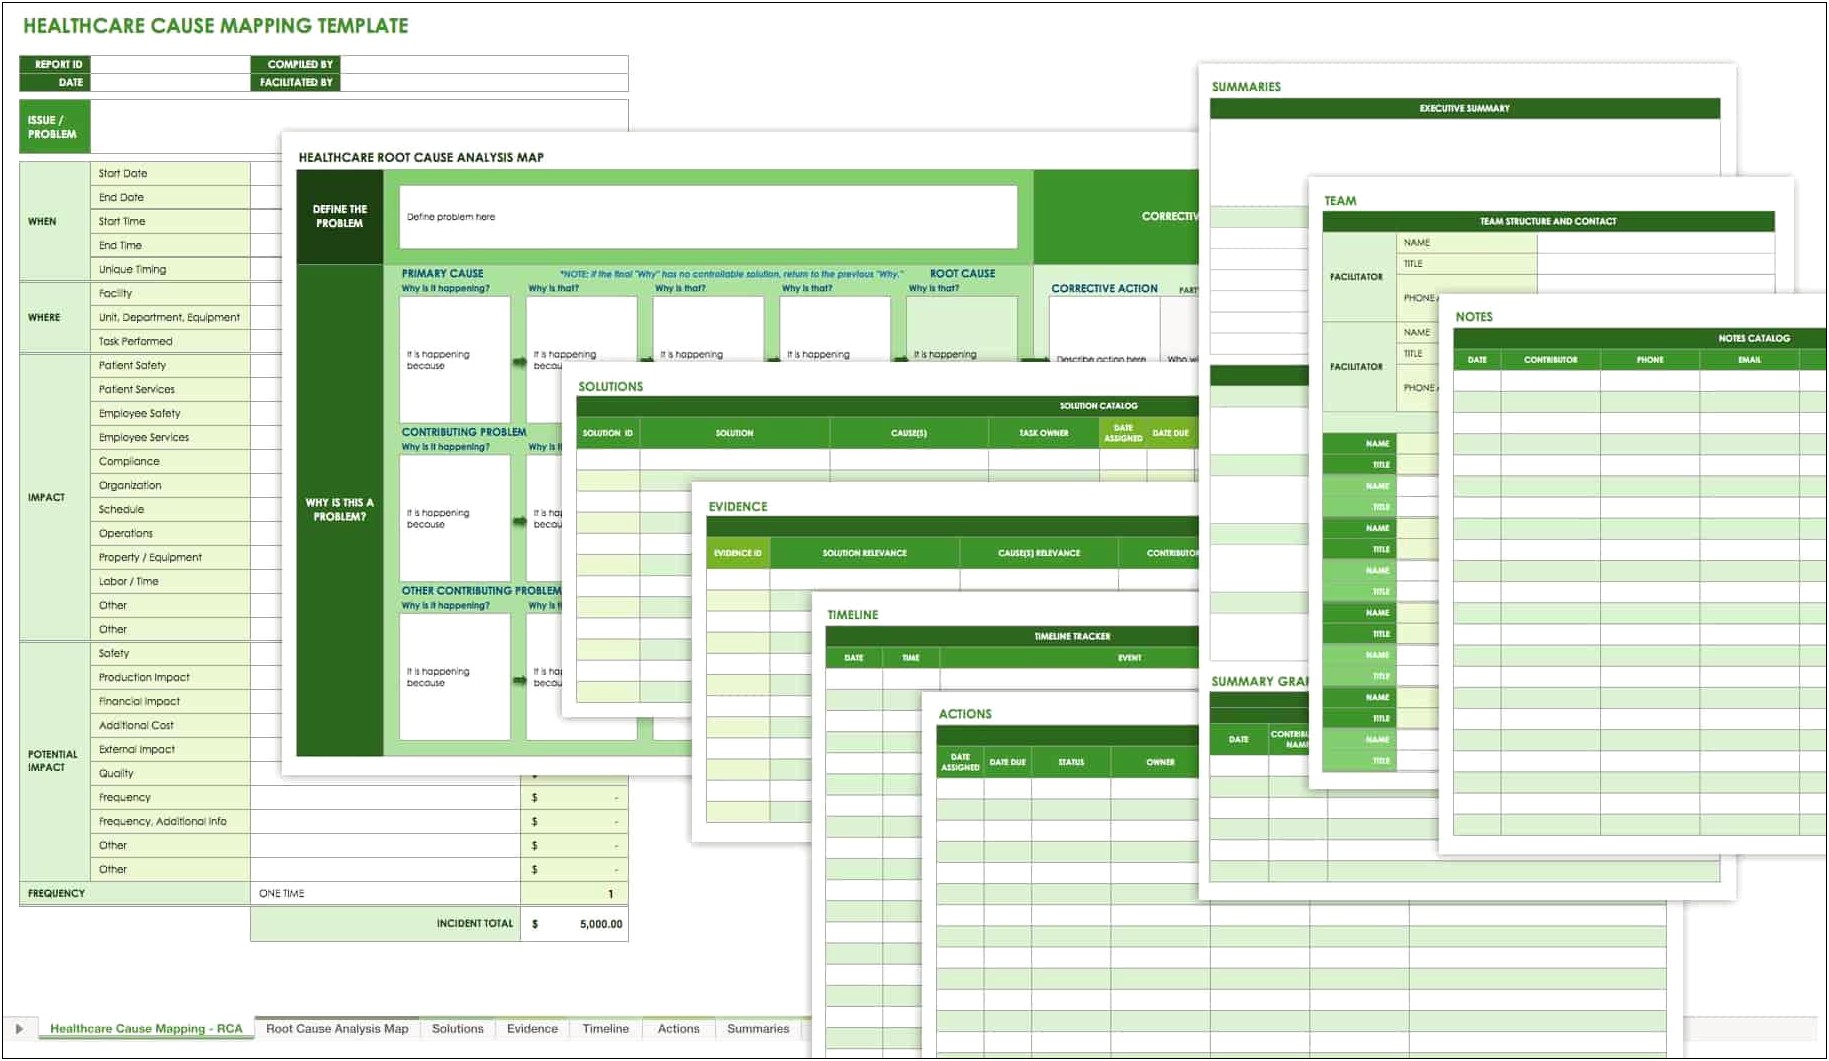 Root Cause Analysis Template Excel Free